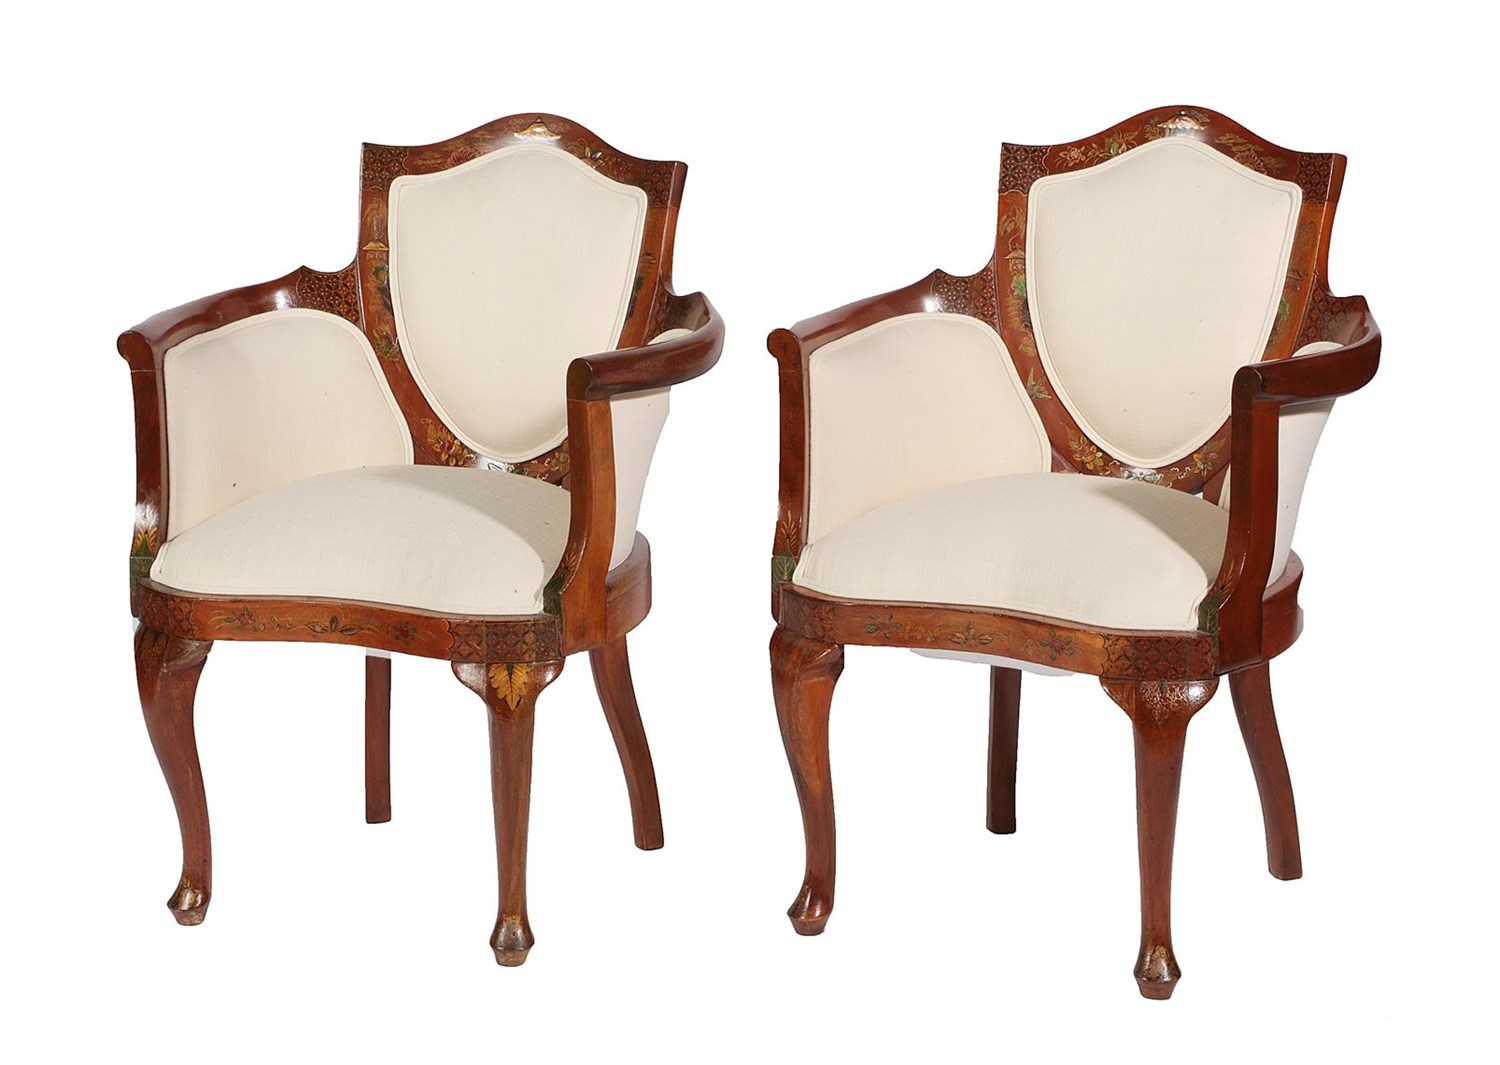 Lot 689 - A Pair of Early 20th Century Chinoiserie and Parcel Gilt Decorated Armchairs, recovered in...